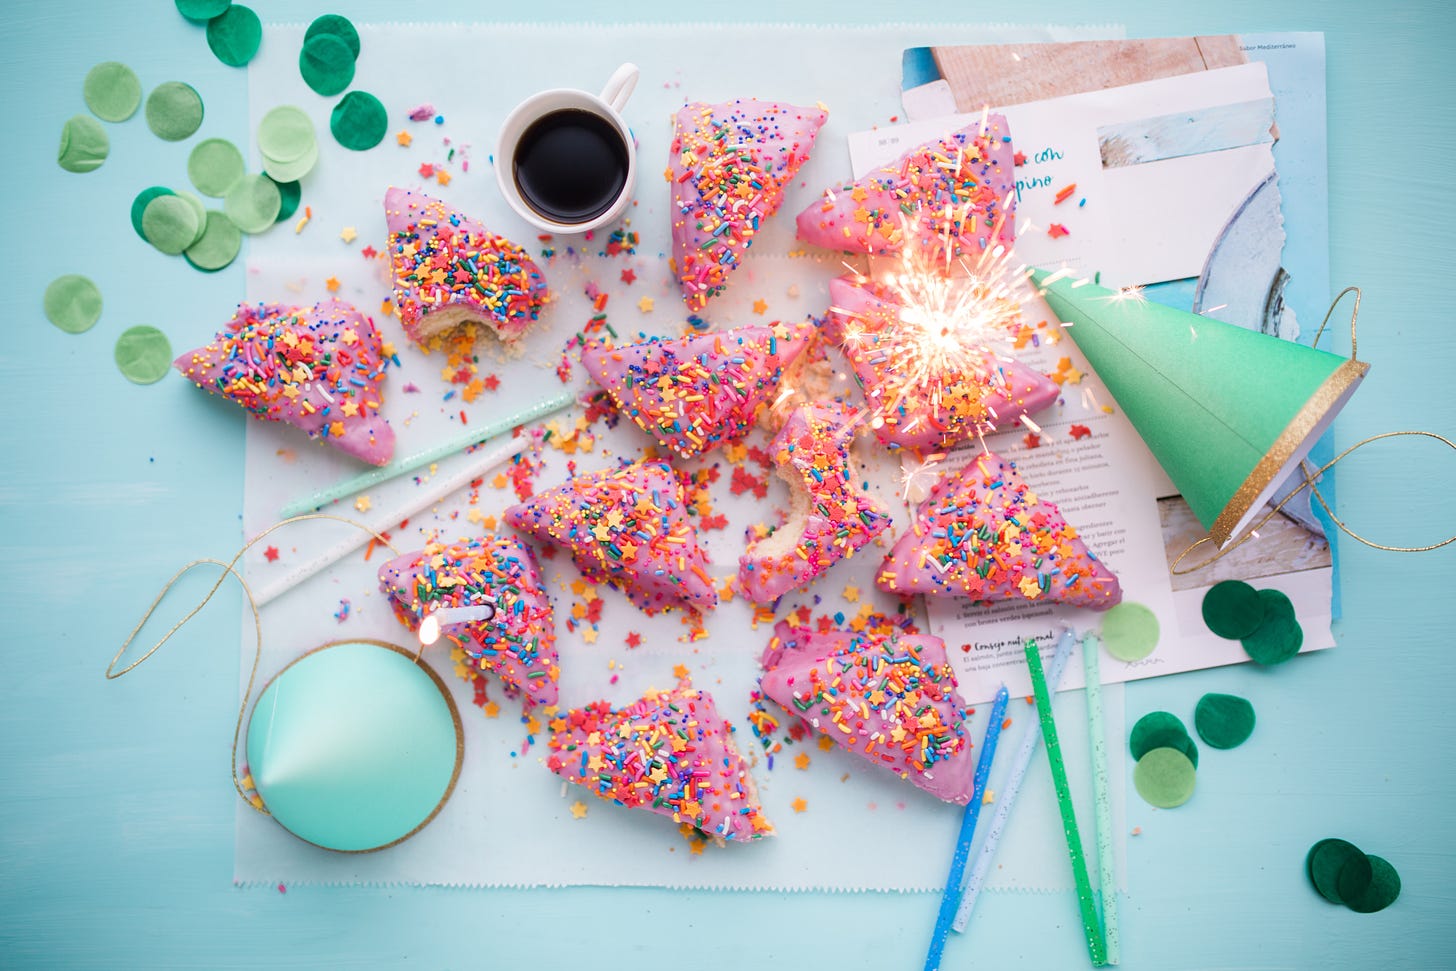 A party mess with triangular pink cupcakes with sprinkles on a table, a couple of party hats, a cup of coffee, some candles, and some paper circle decorations.